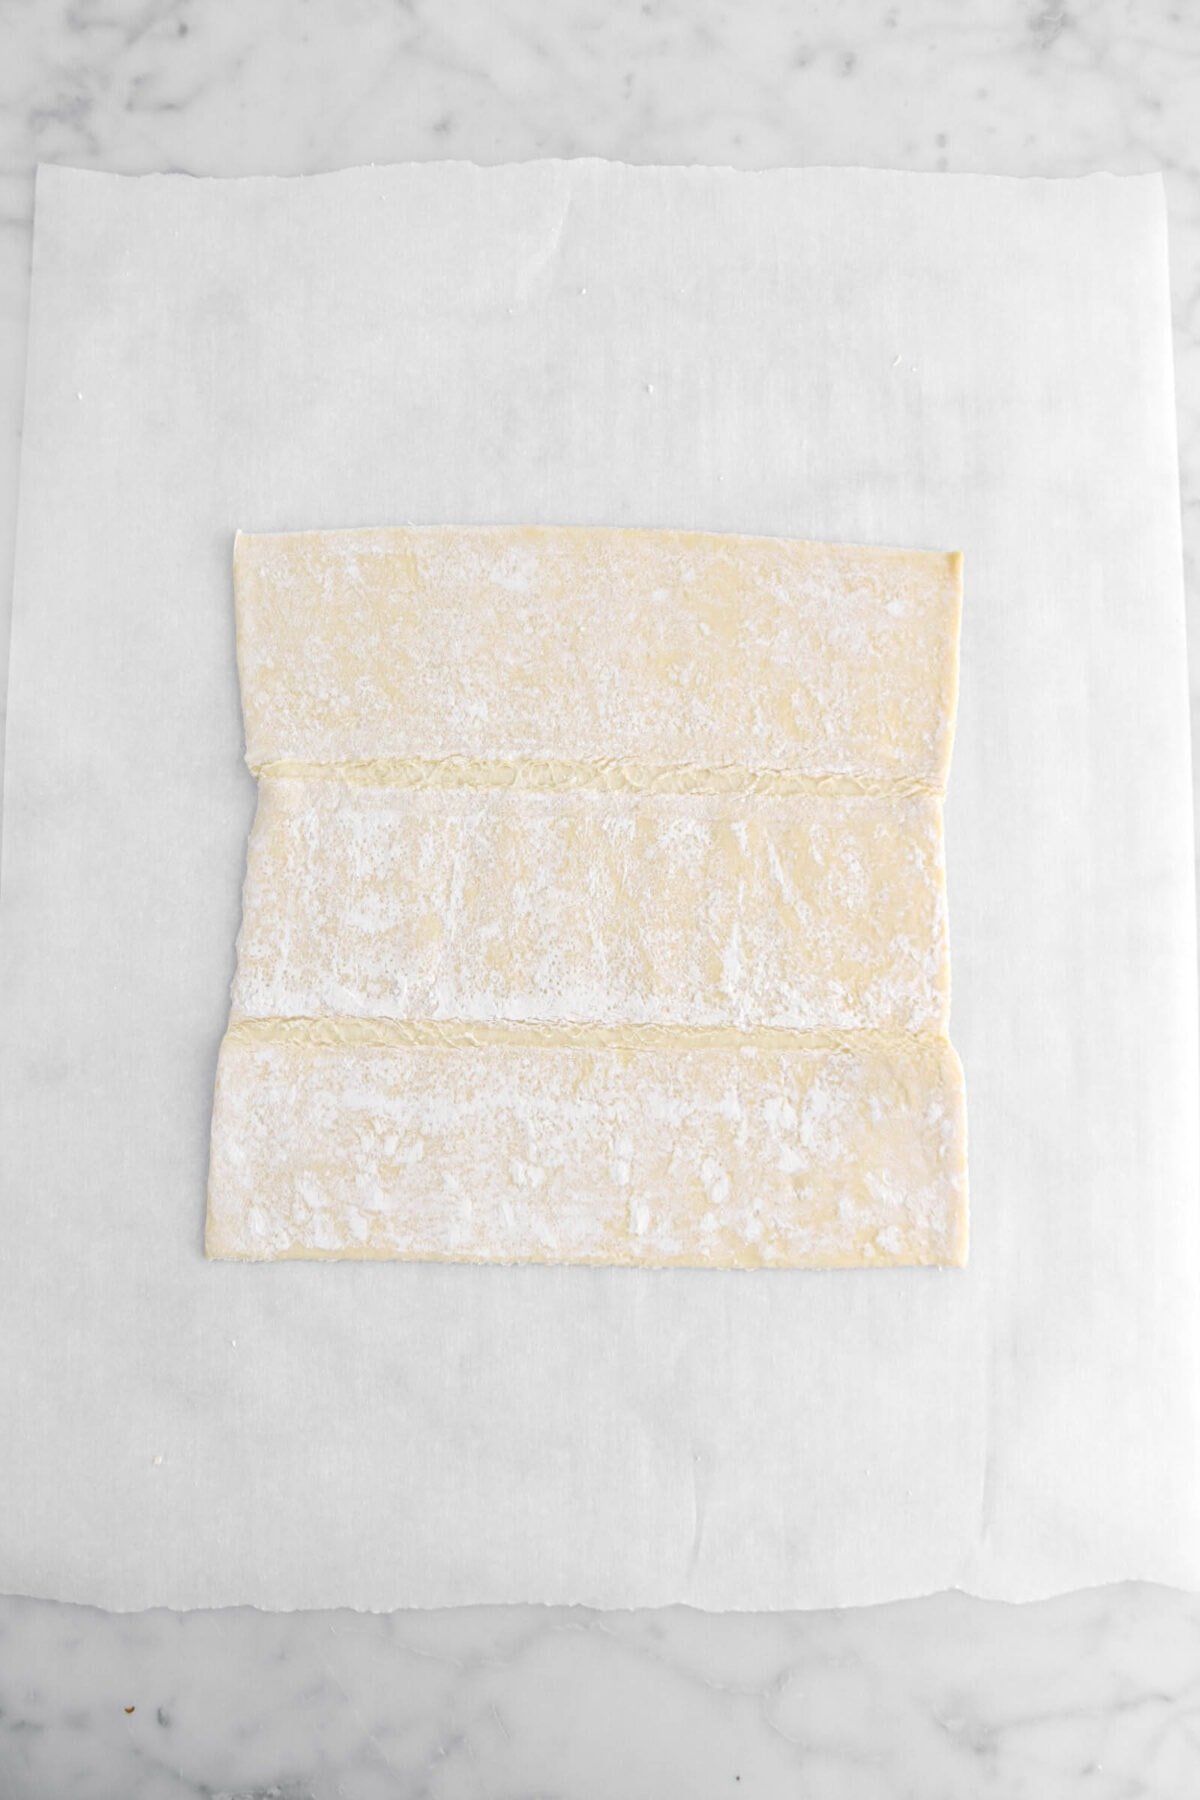 puff pastry sheet on parchment paper.